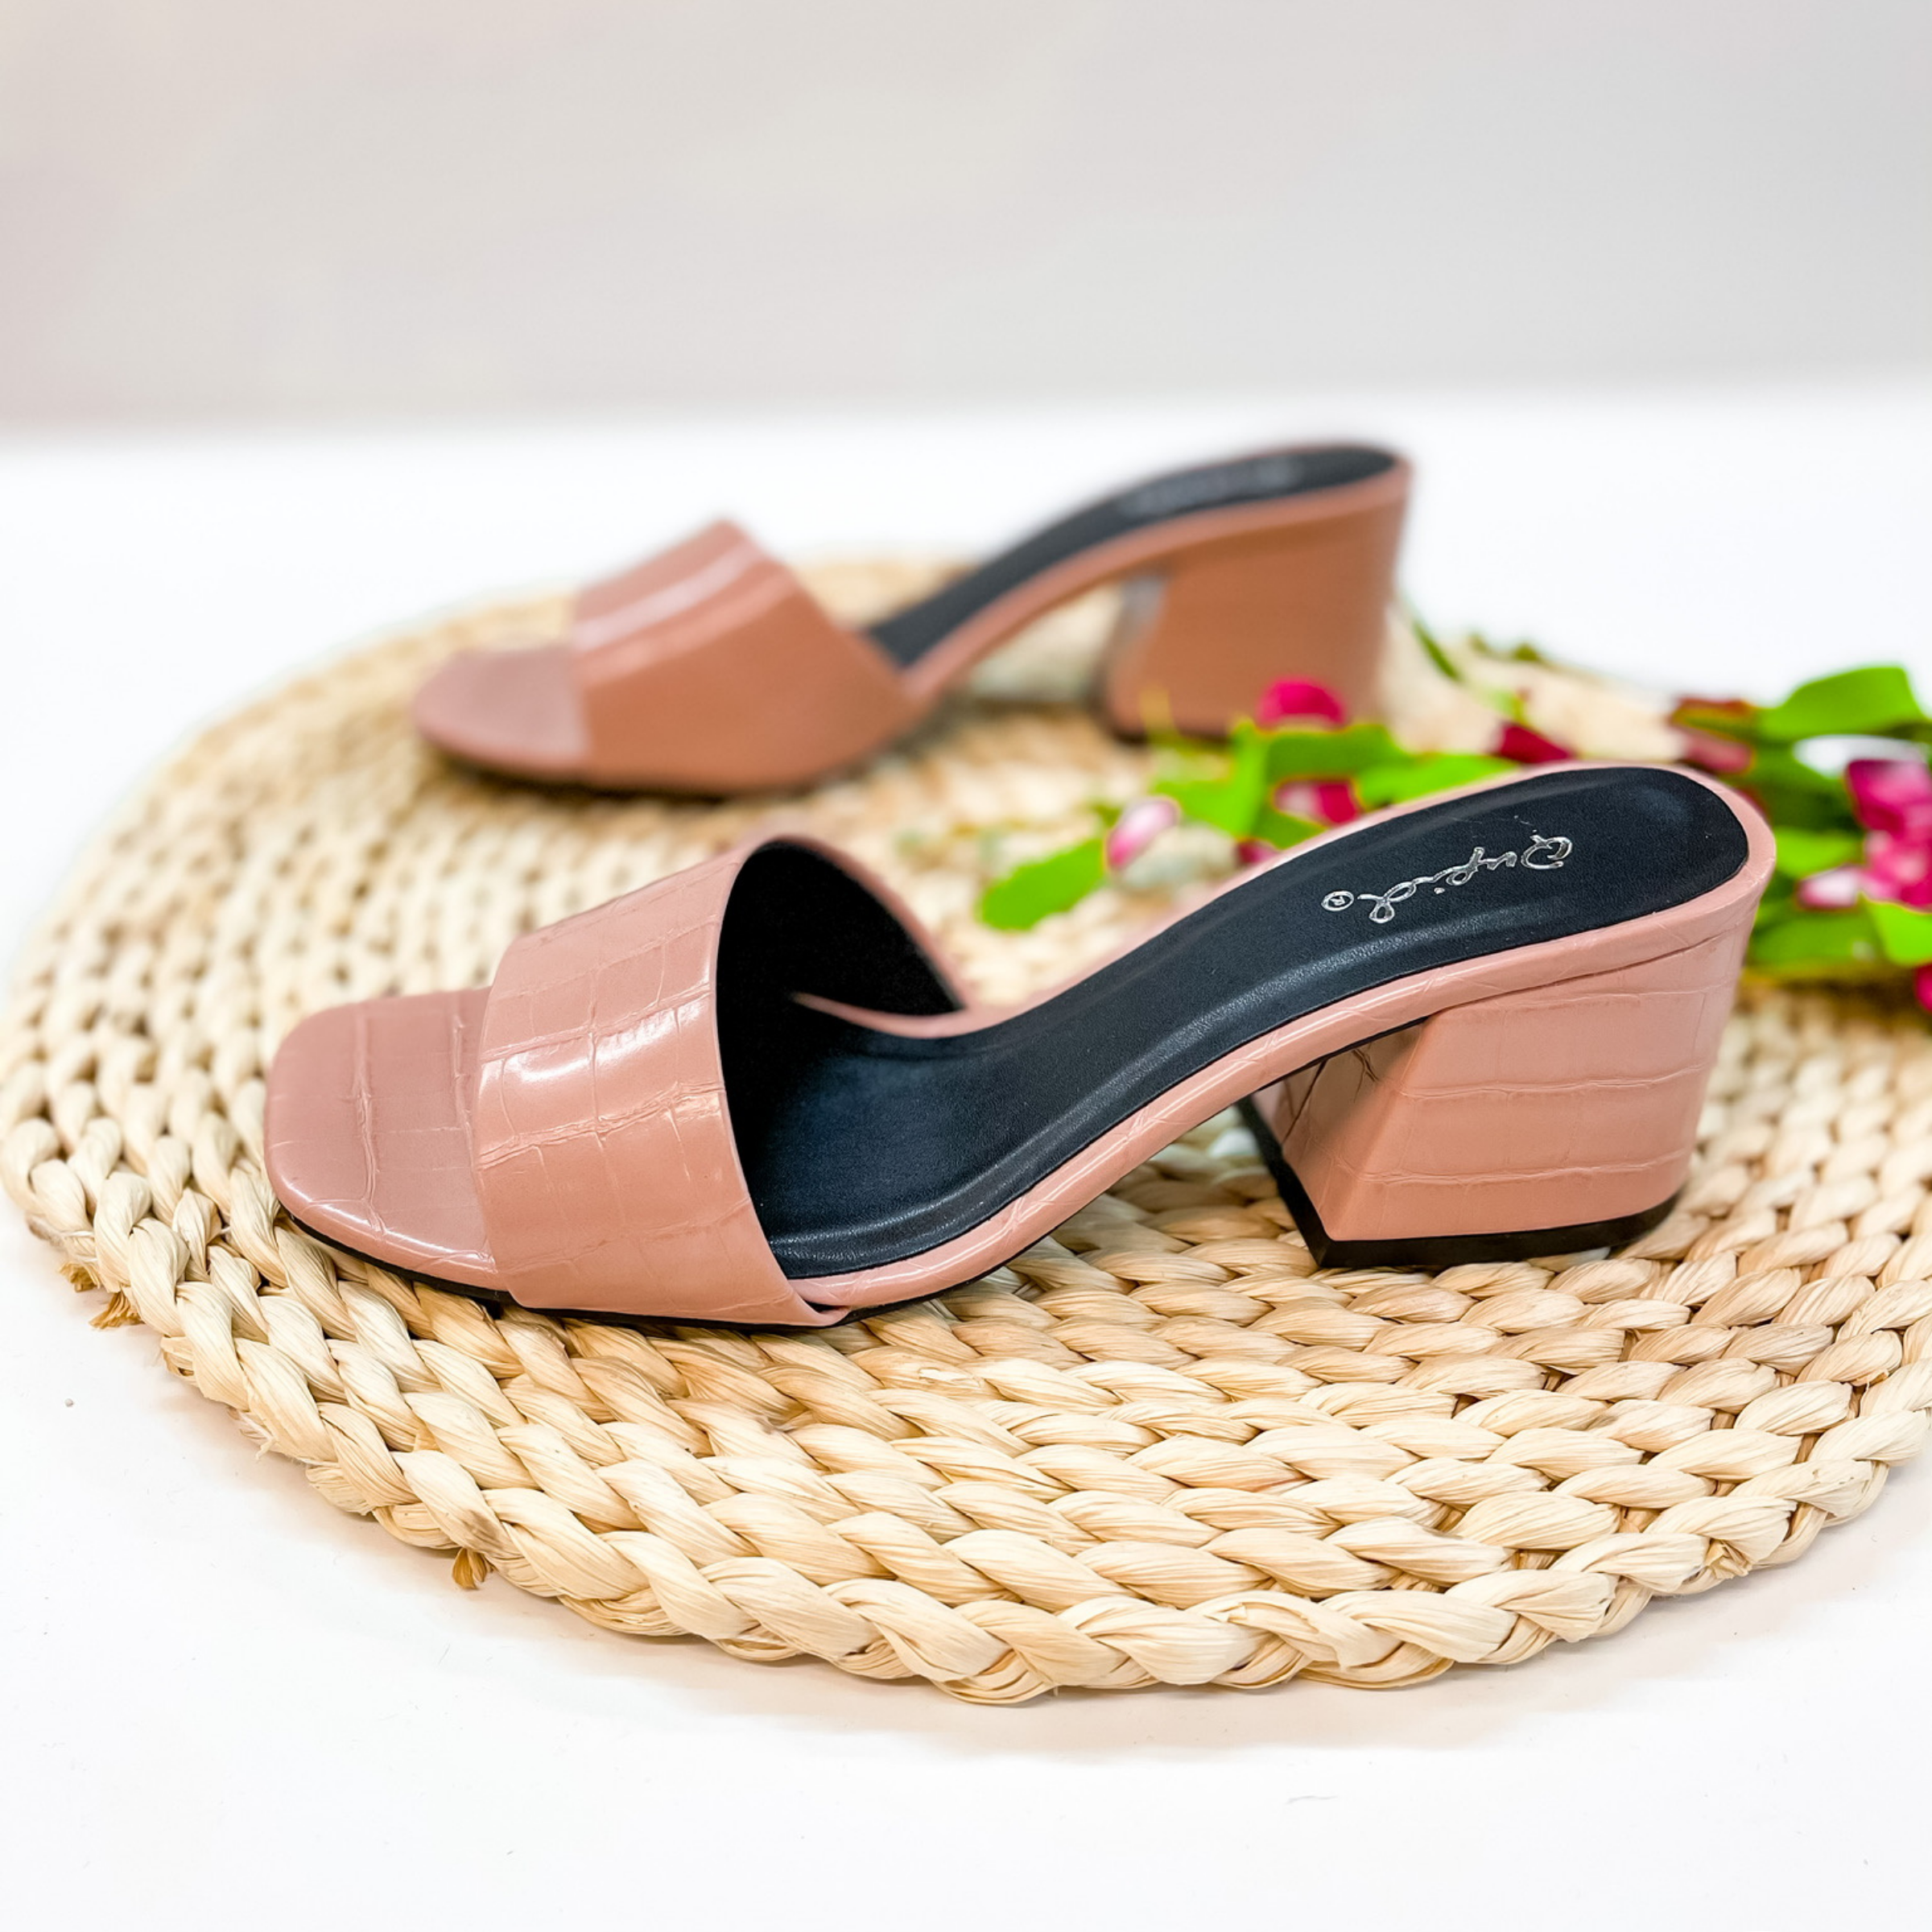 Walk The Walk Mini Block Heels with Strap in Blush Croc - Giddy Up Glamour Boutique